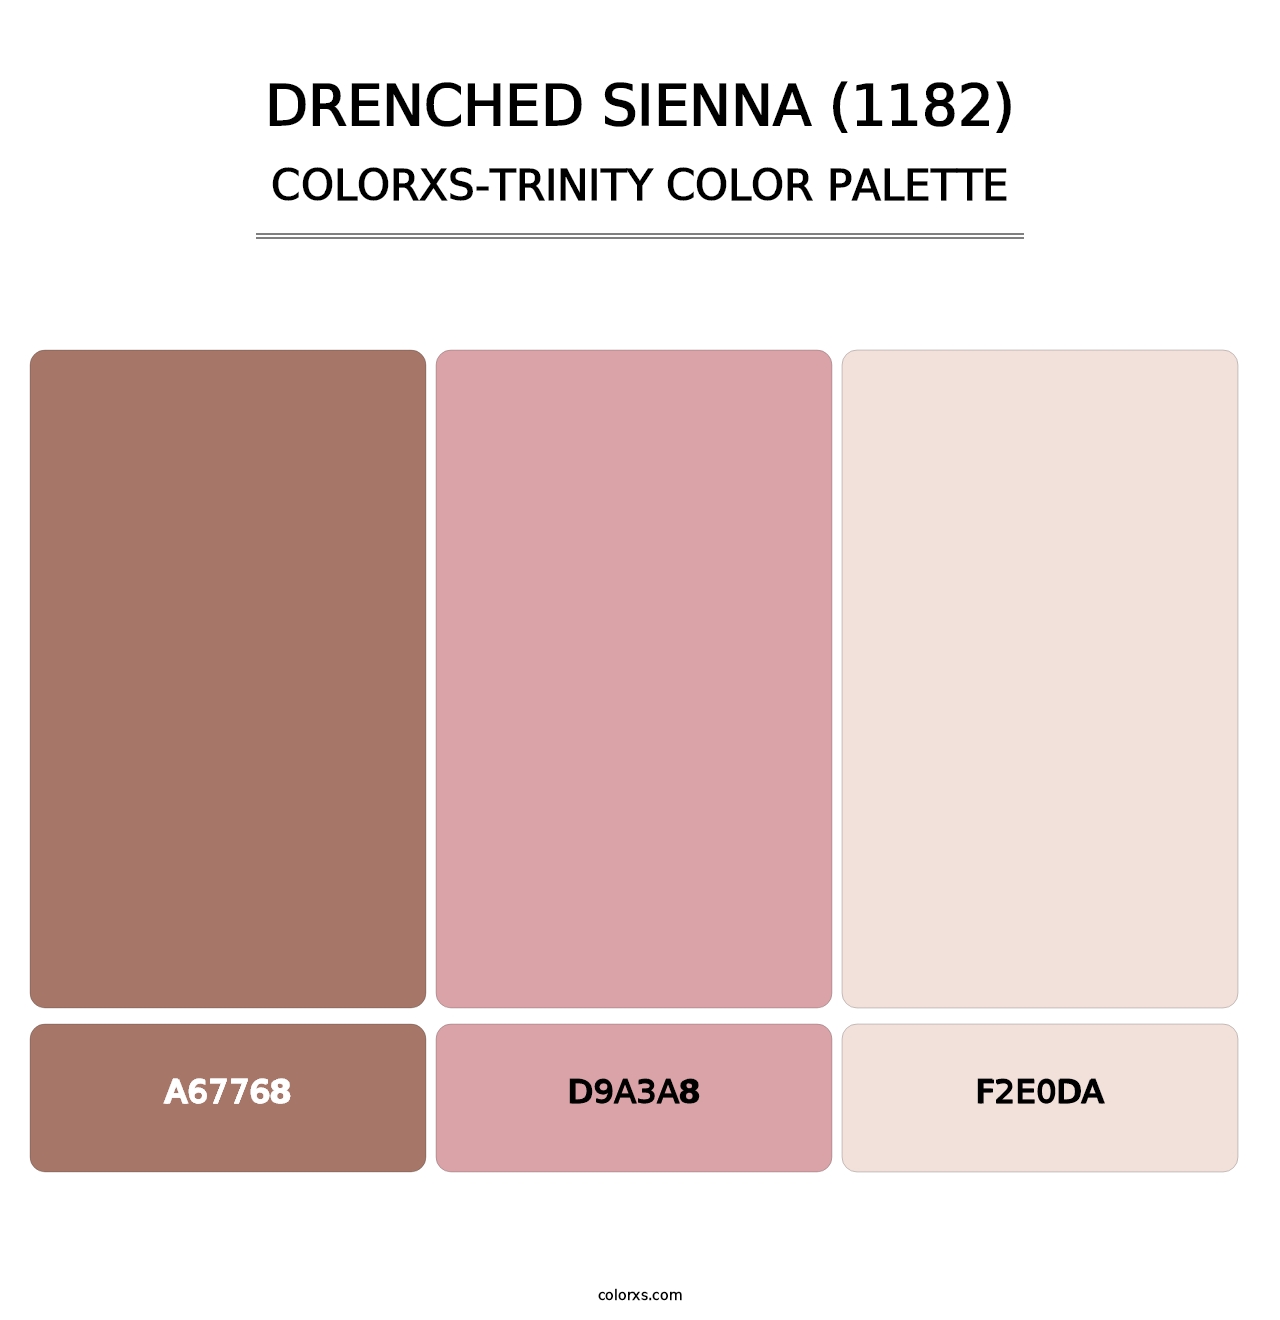 Drenched Sienna (1182) - Colorxs Trinity Palette